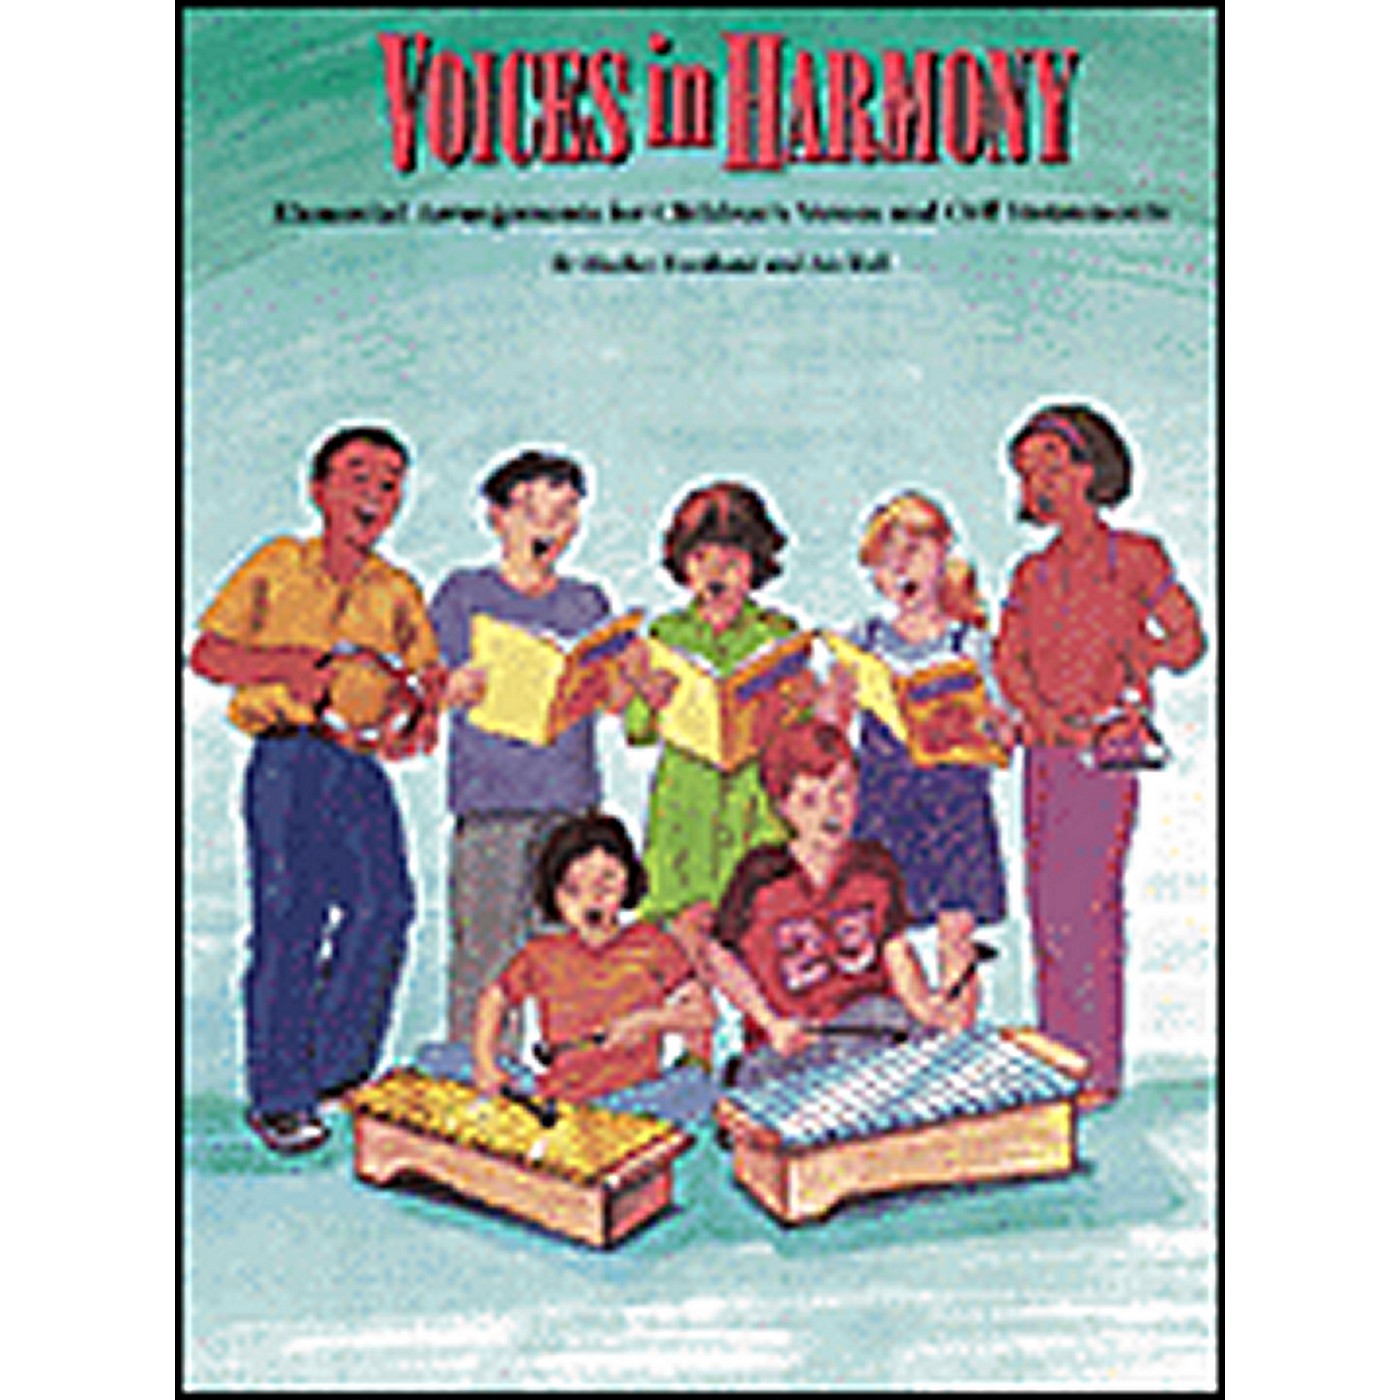 Hal Leonard Voices in Harmony - Orff Collection Book thumbnail